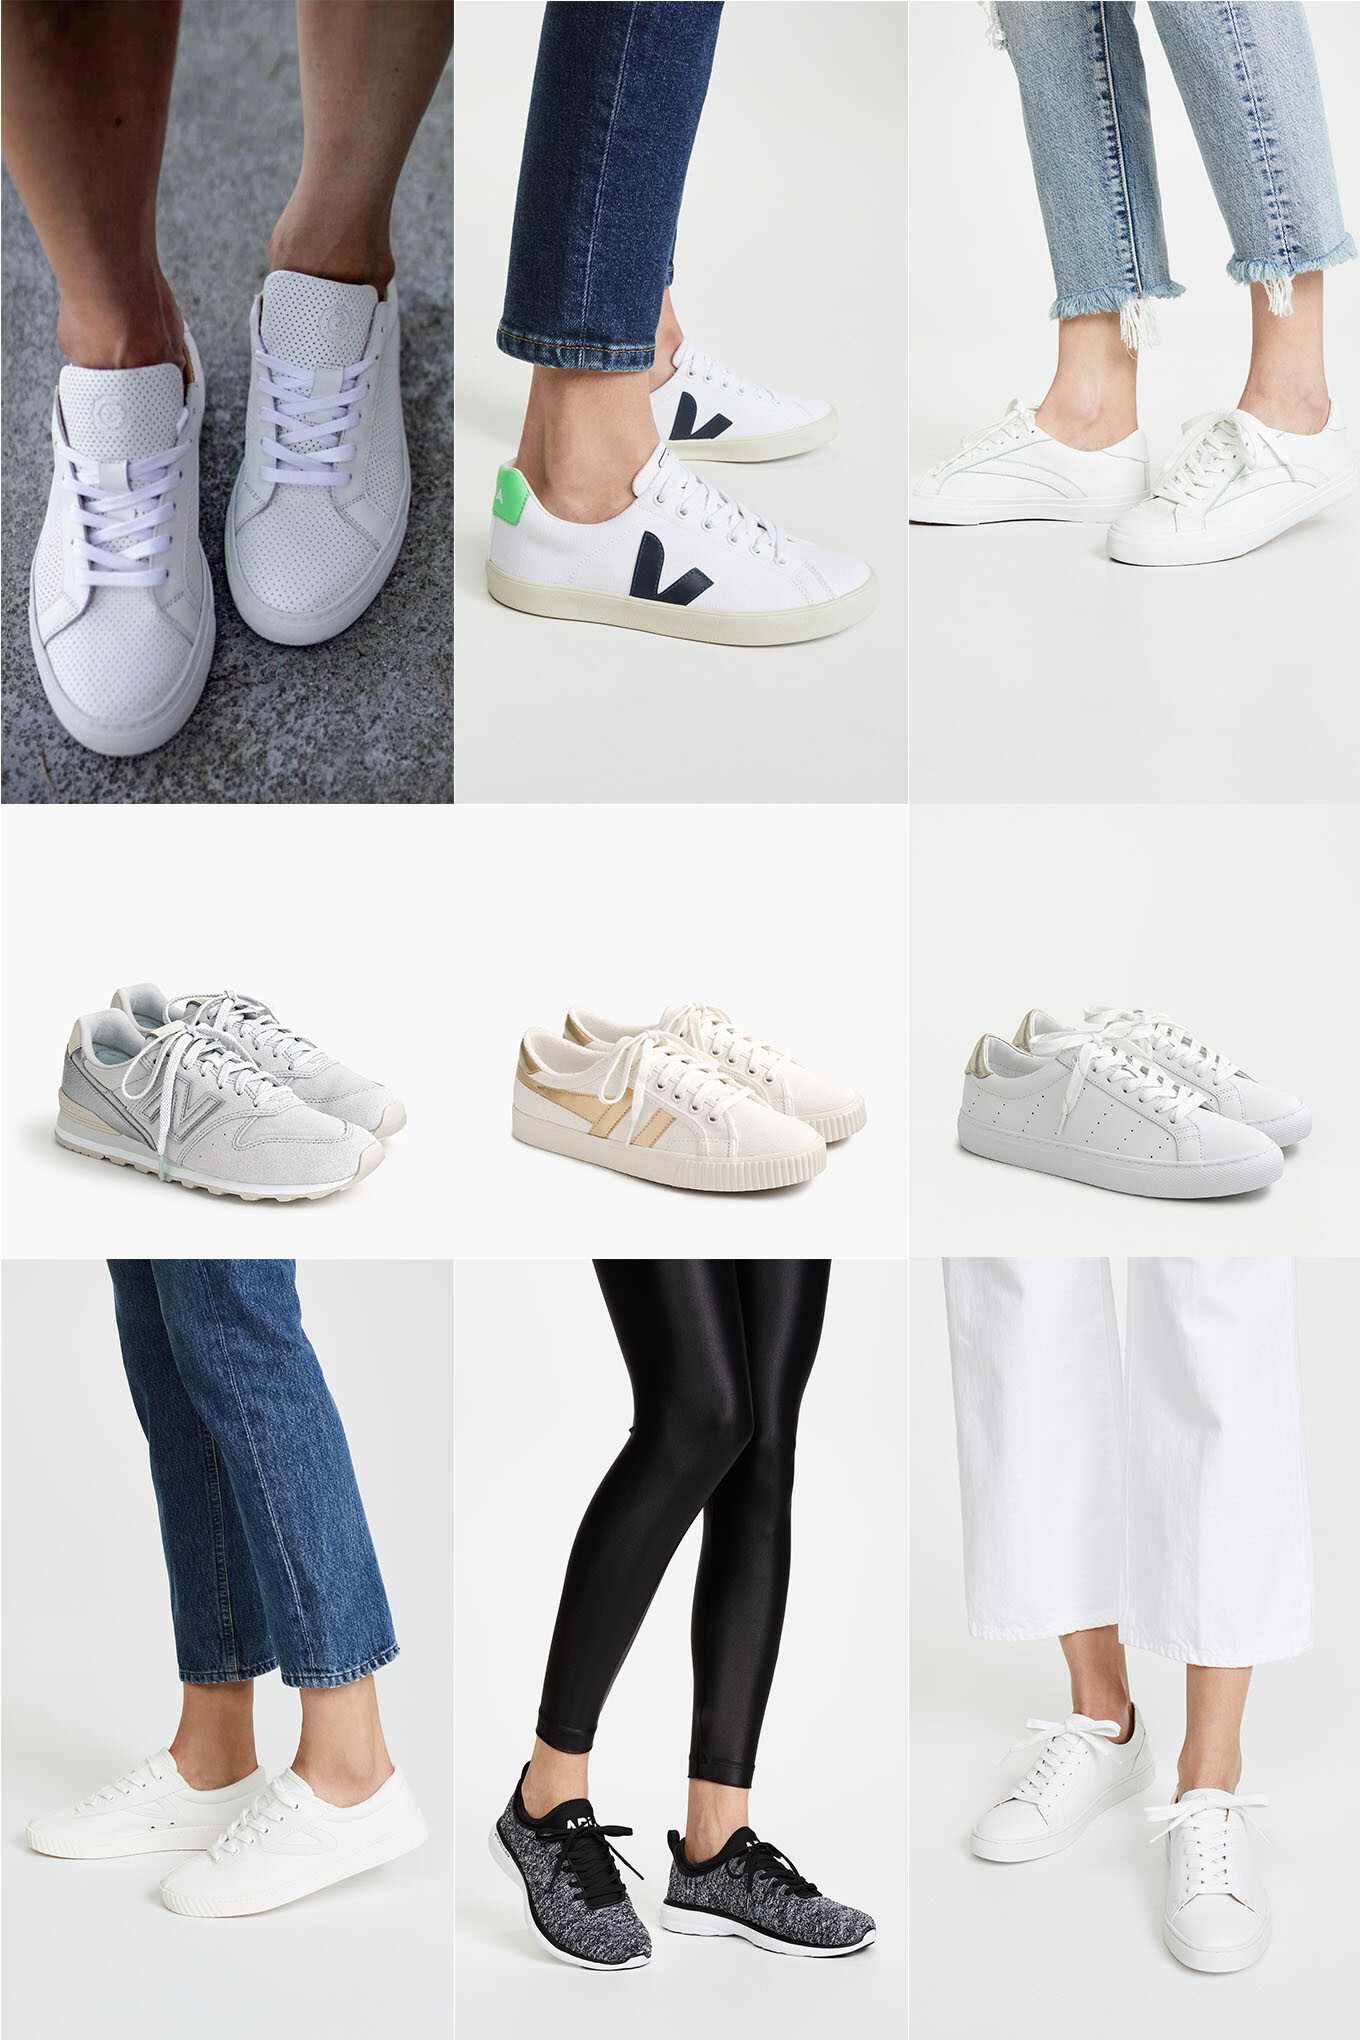 Looking for a new pair of sneakers can be overwhelming! Especially if you want them to go from casual to dress up. Check out these styles!